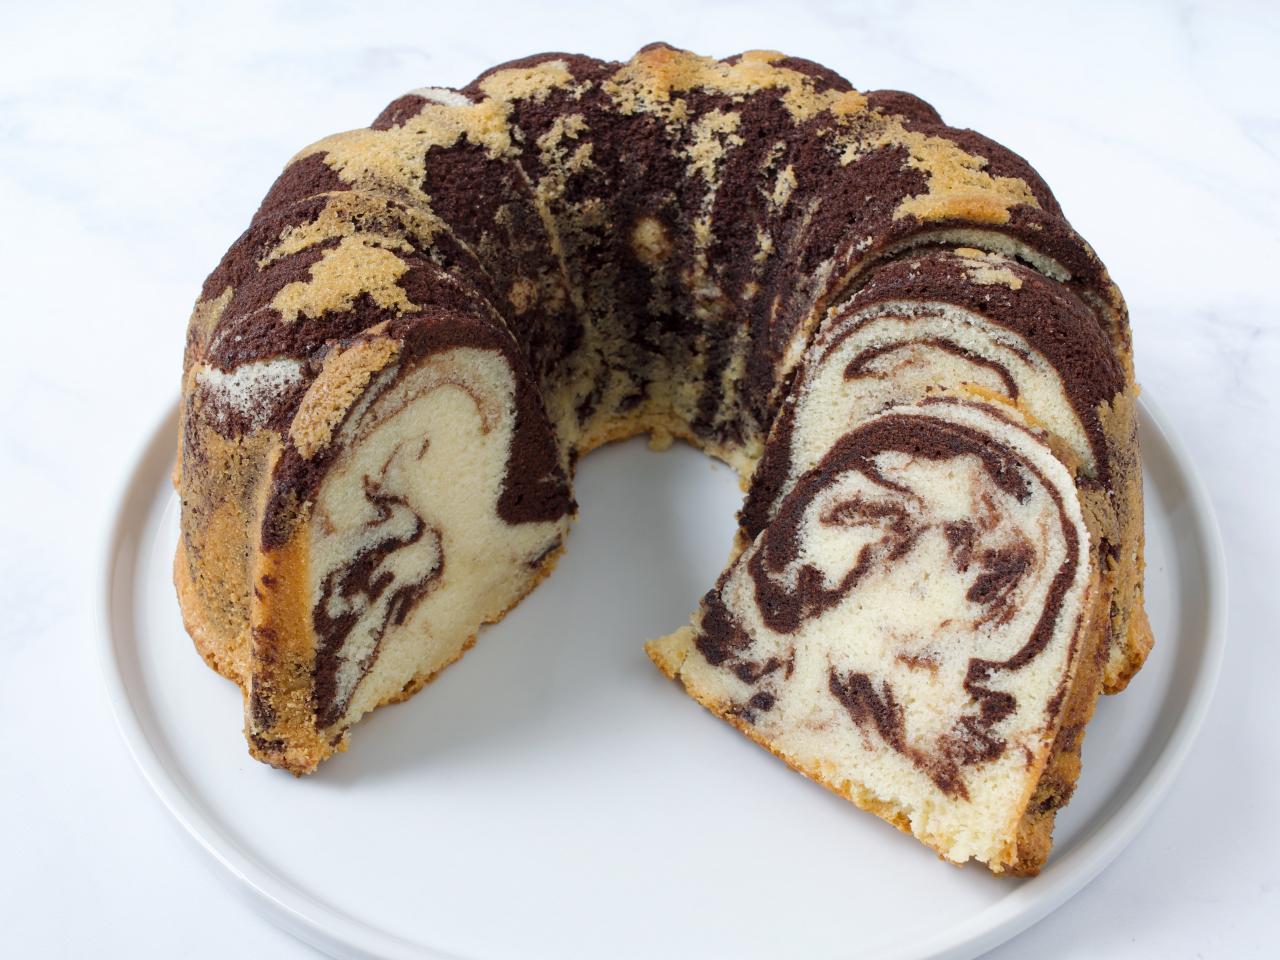 Marble Bundt Cake – First Look, Then Cook